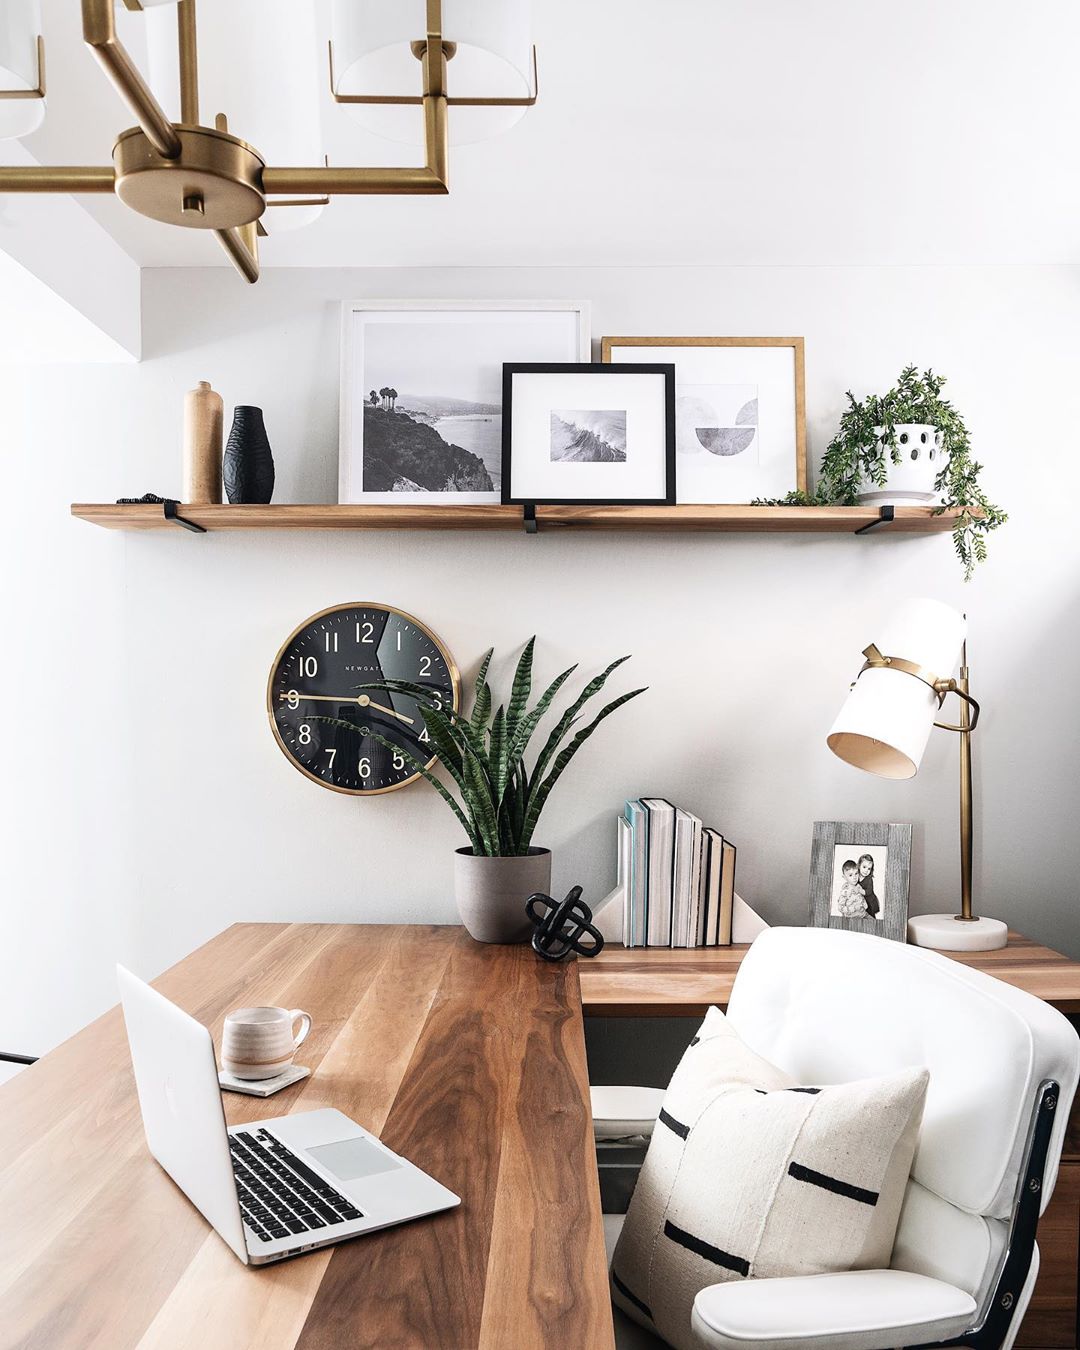 https://www.extraspace.com/blog/wp-content/uploads/2020/04/create-productive-work-from-home-office-shelves.jpg